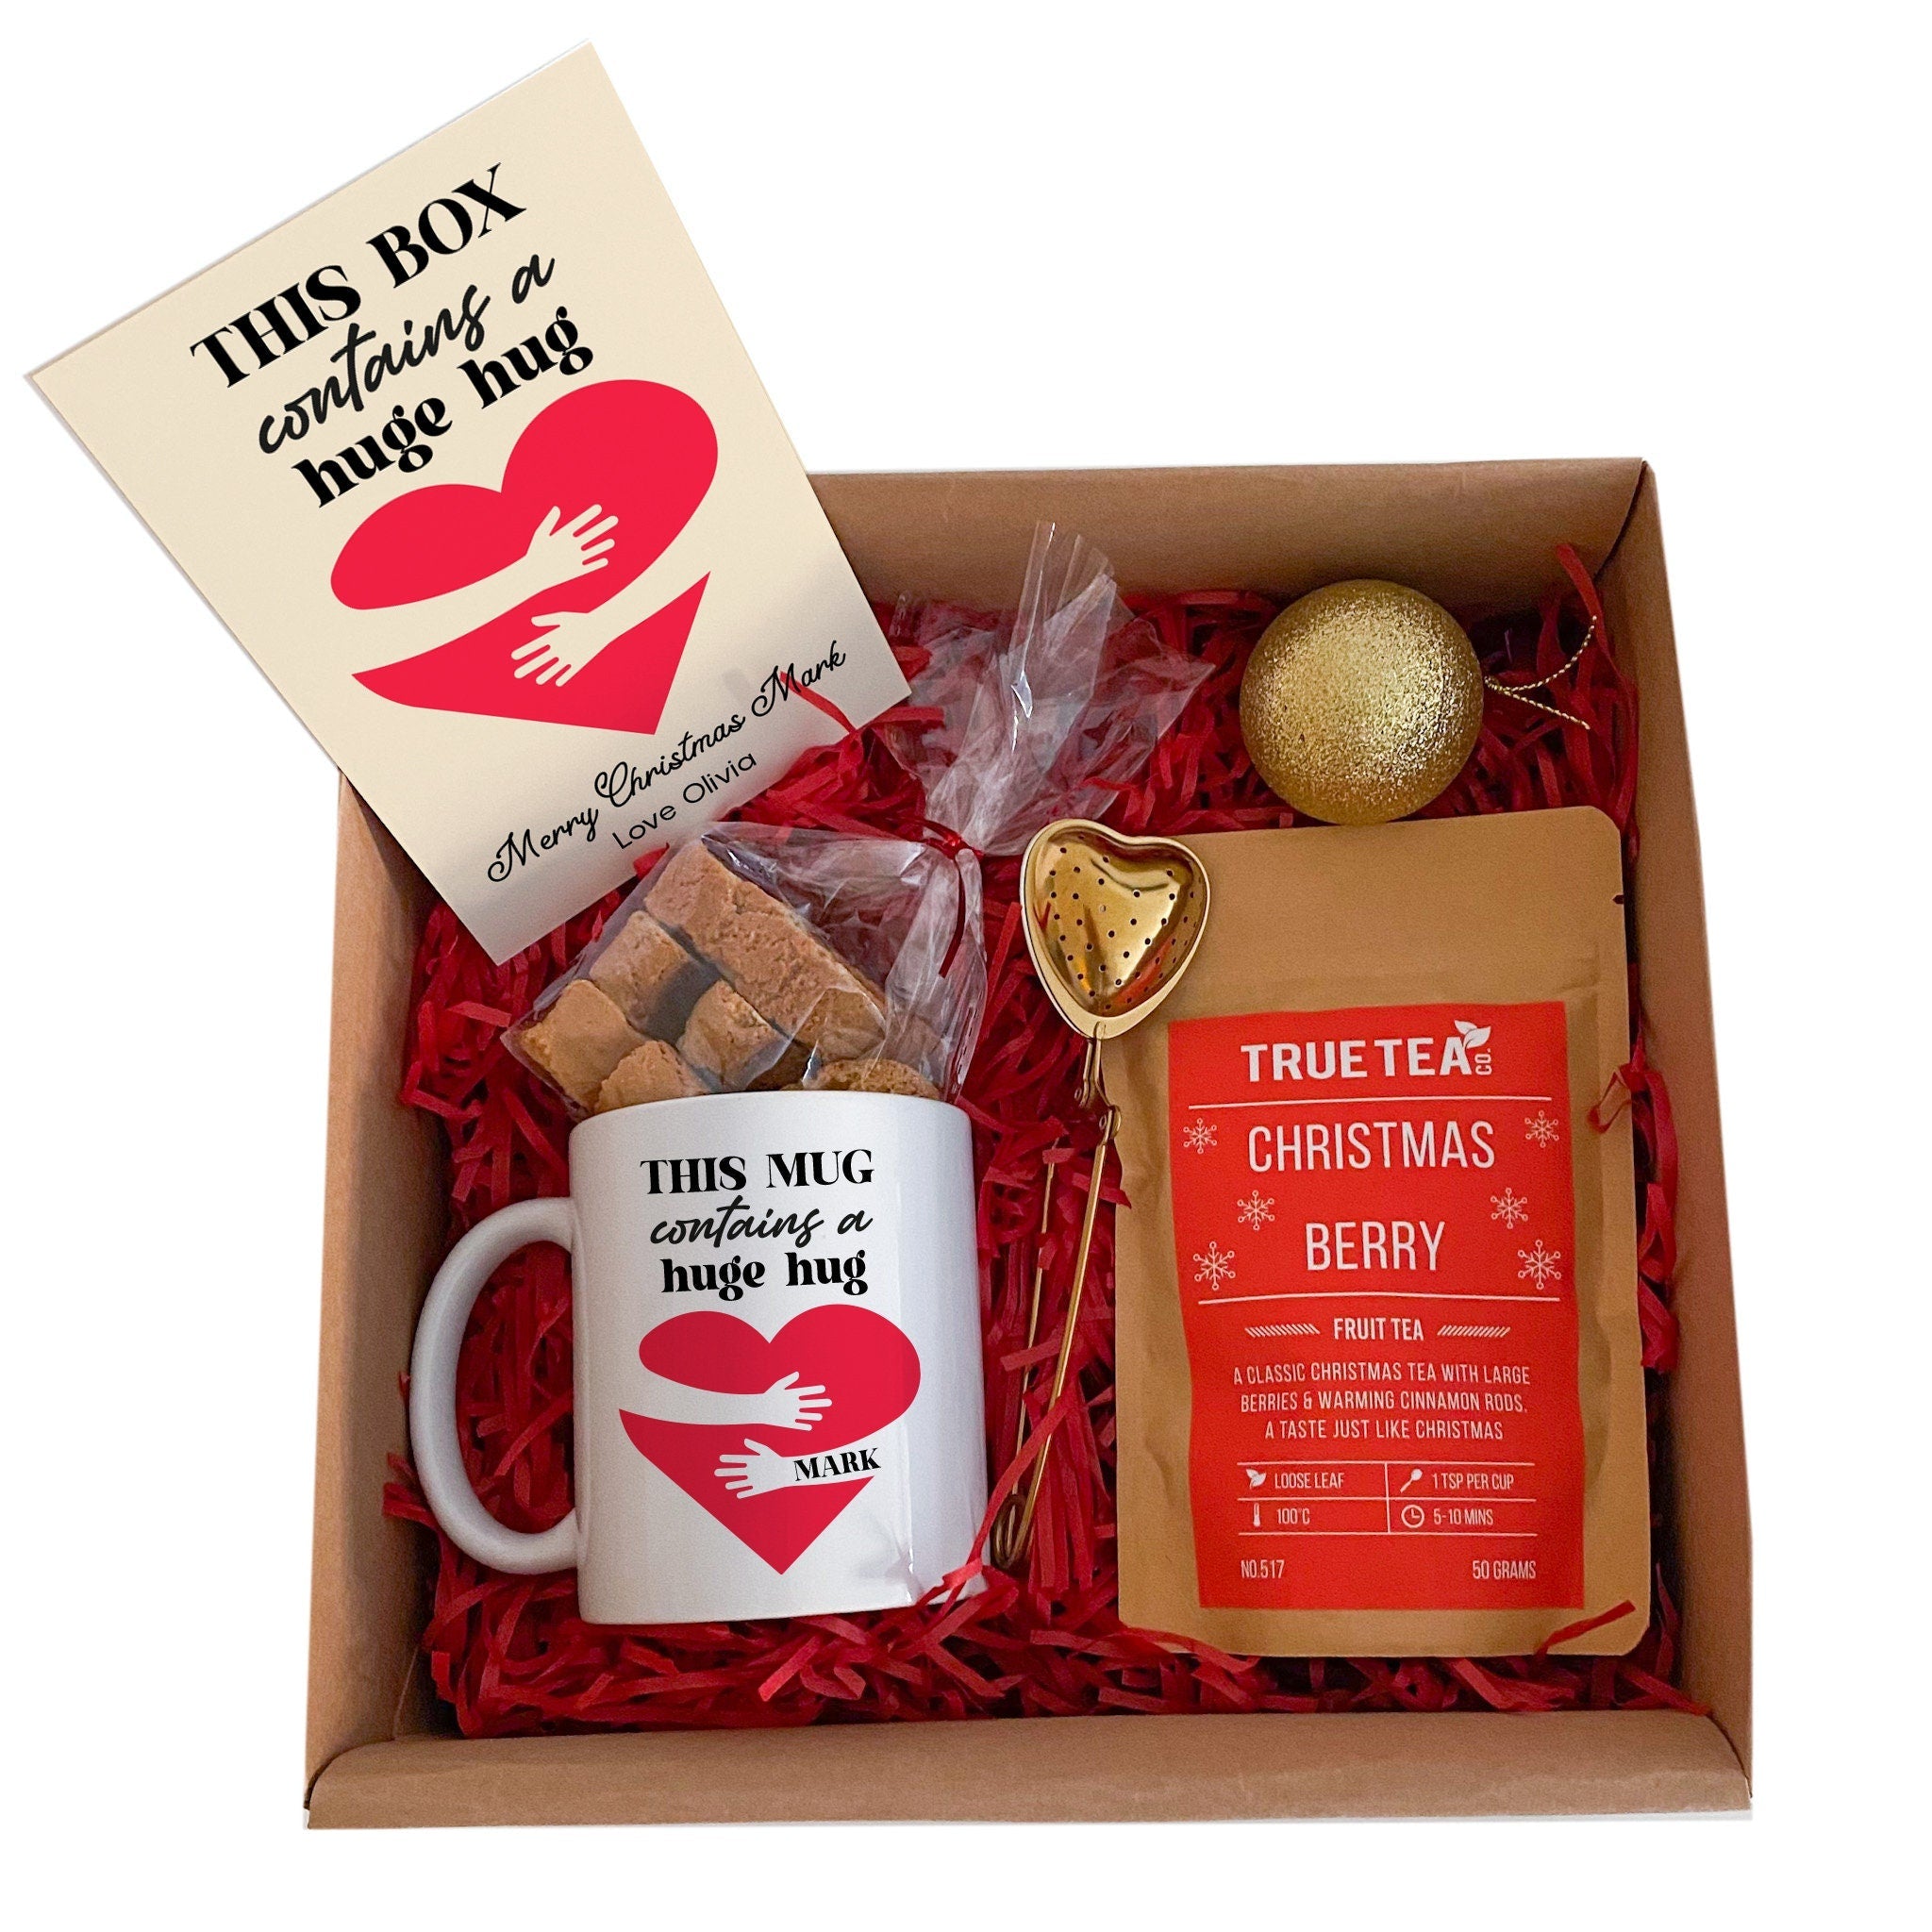 Personalised Hug in a Mug Gift Set, Tea lover Gift for Him and Her, This Box Contains A Big Hug